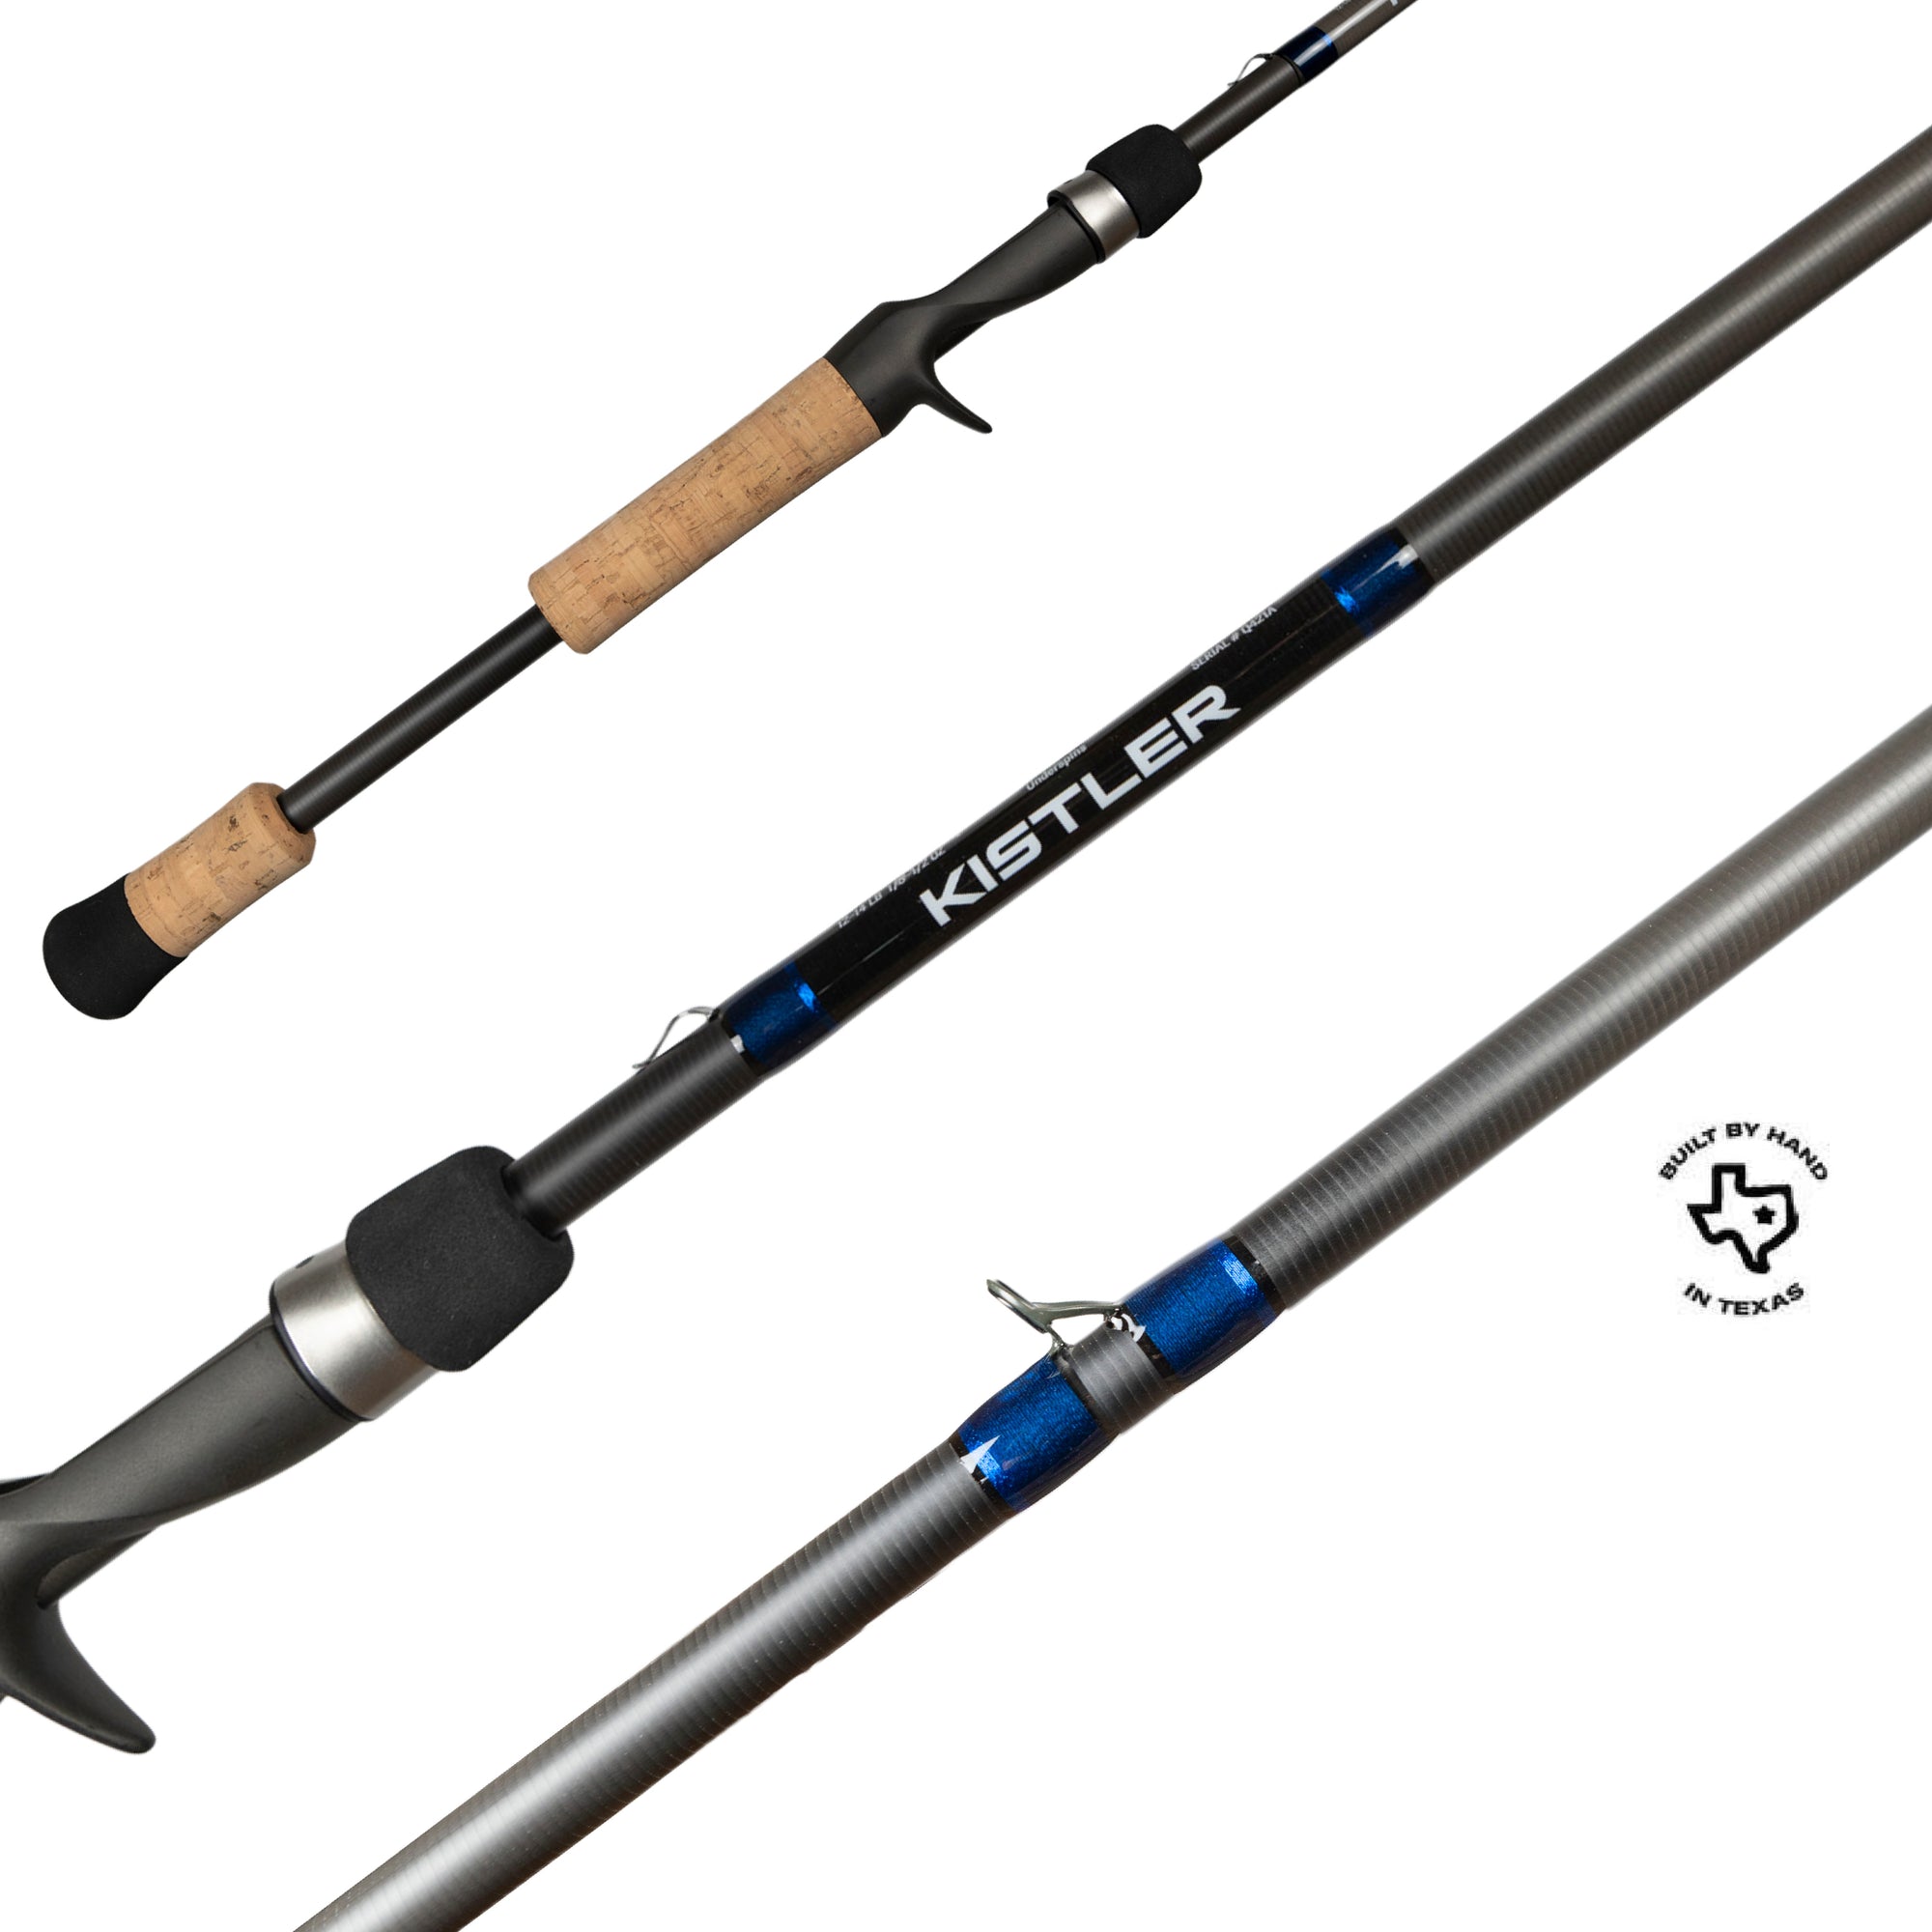 Fishing Rods for sale in Yetter, Iowa